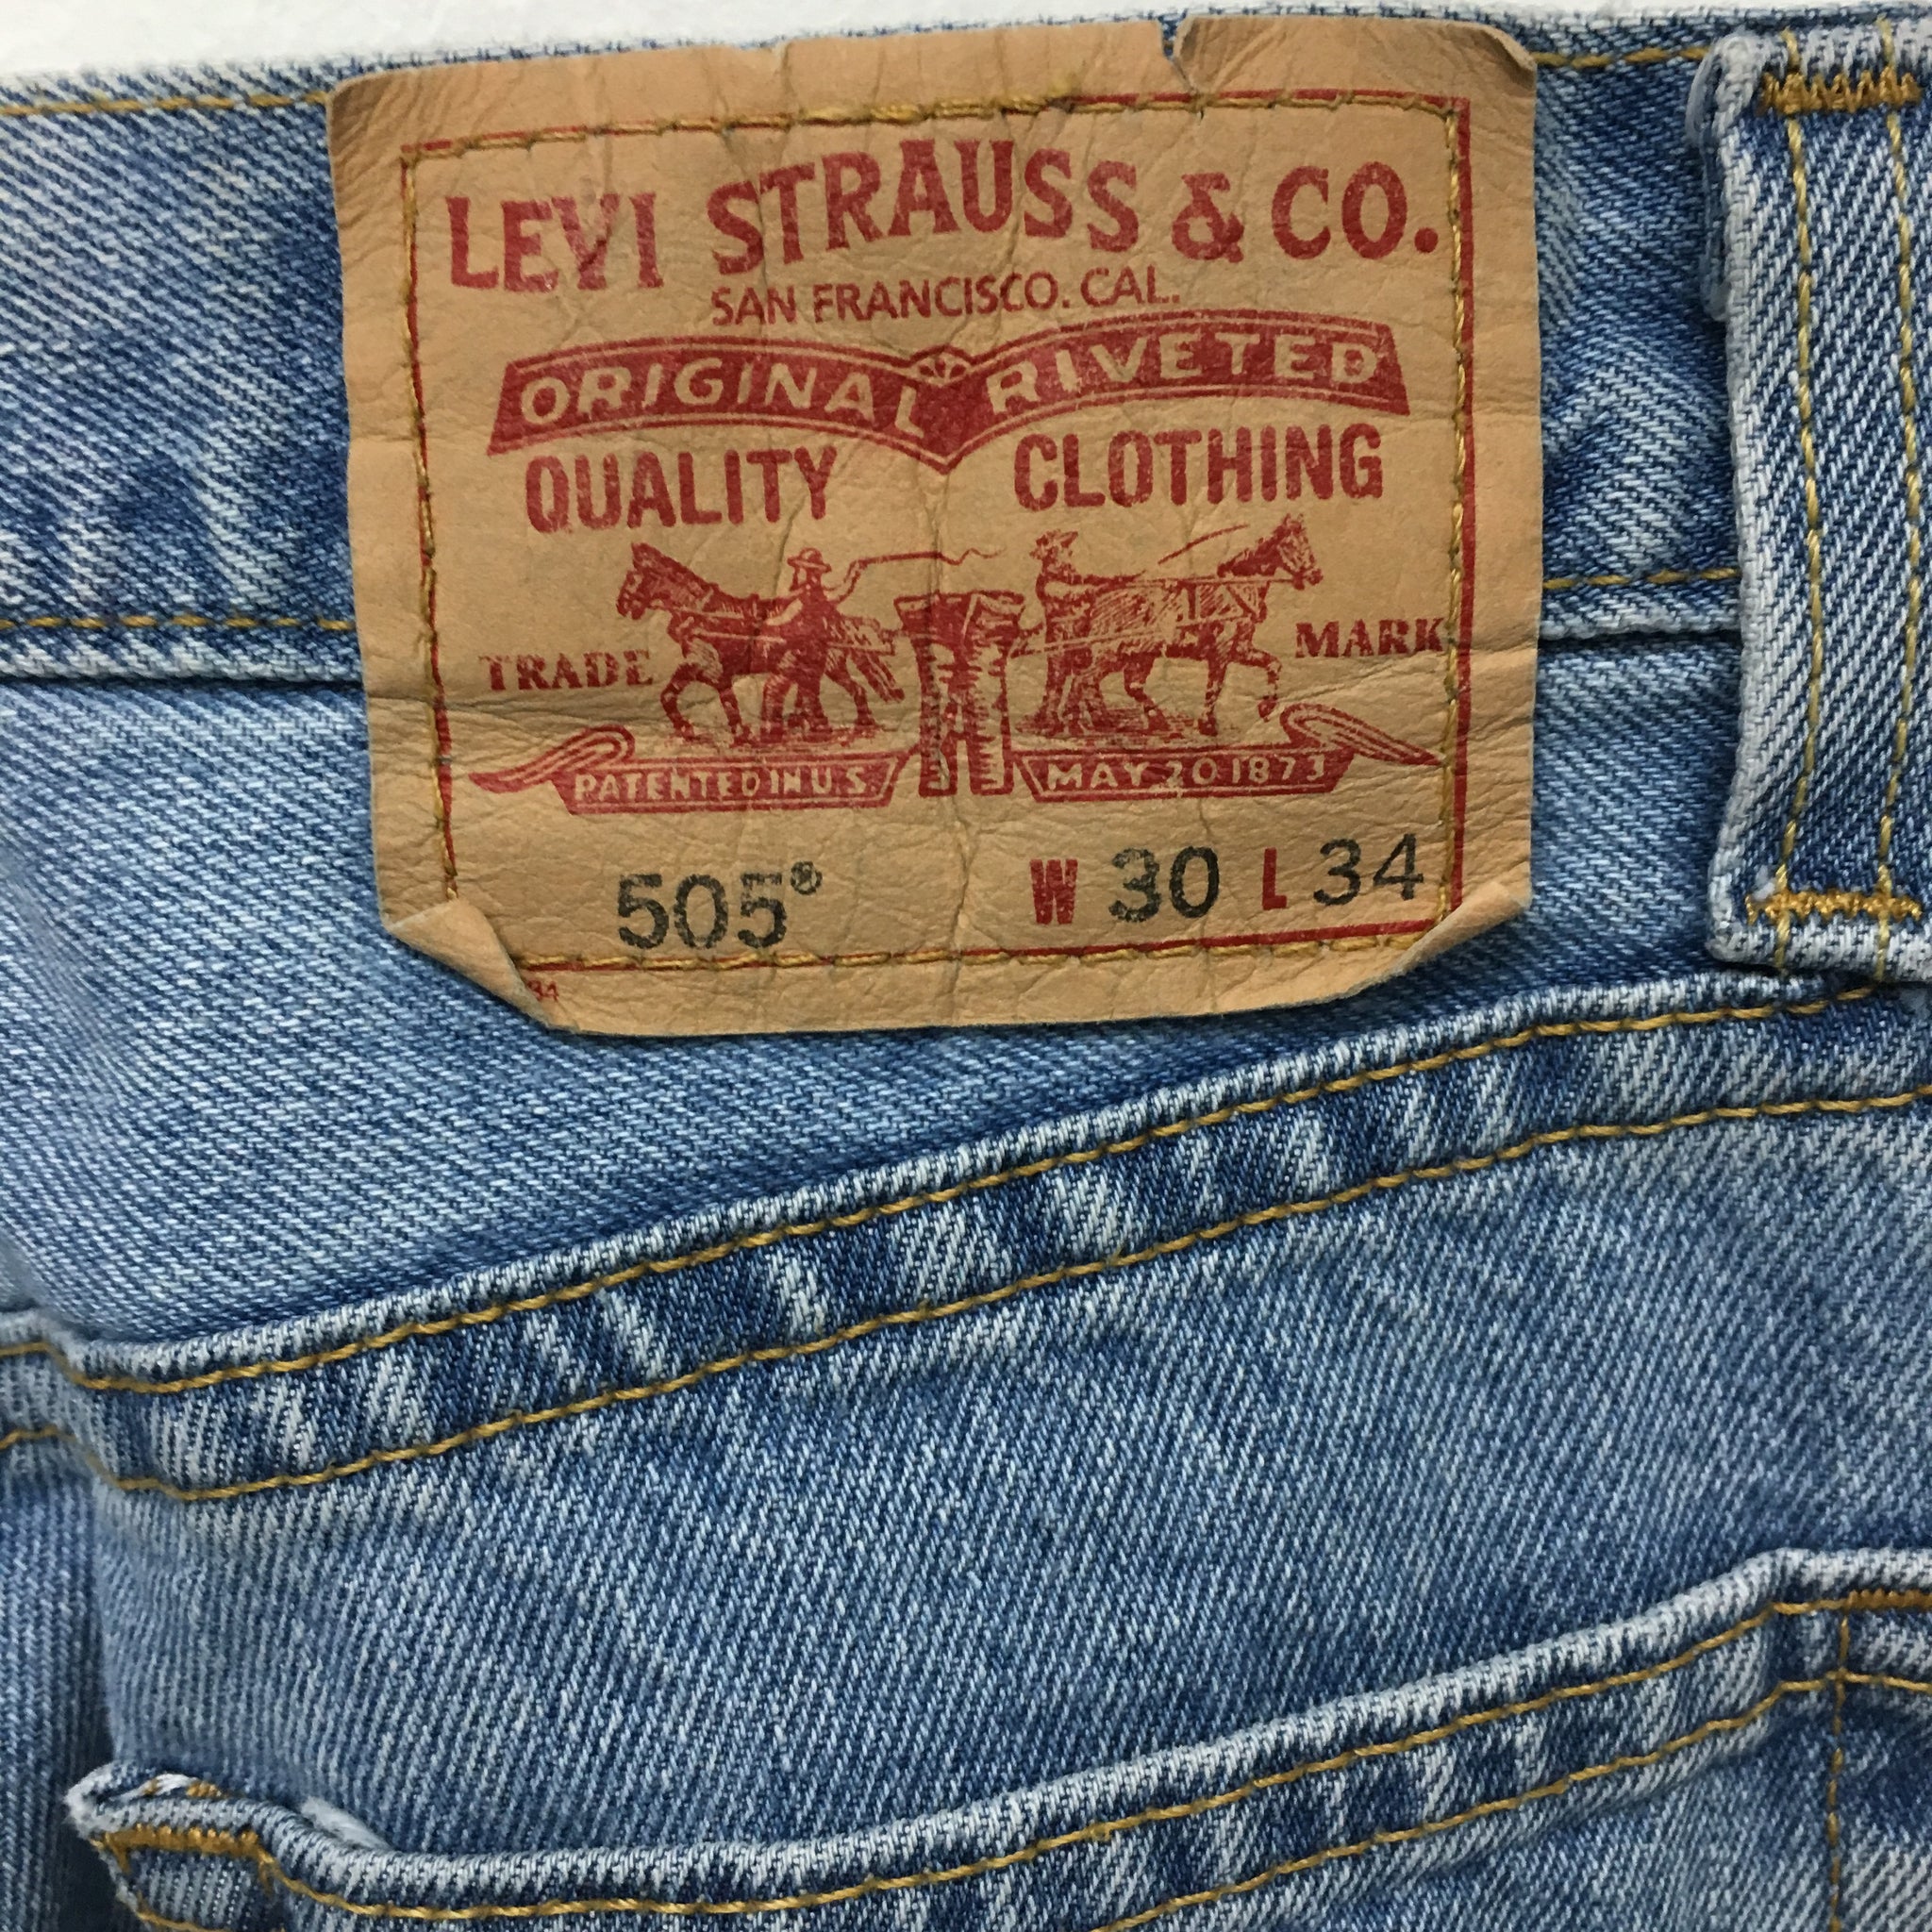 30x34 jeans